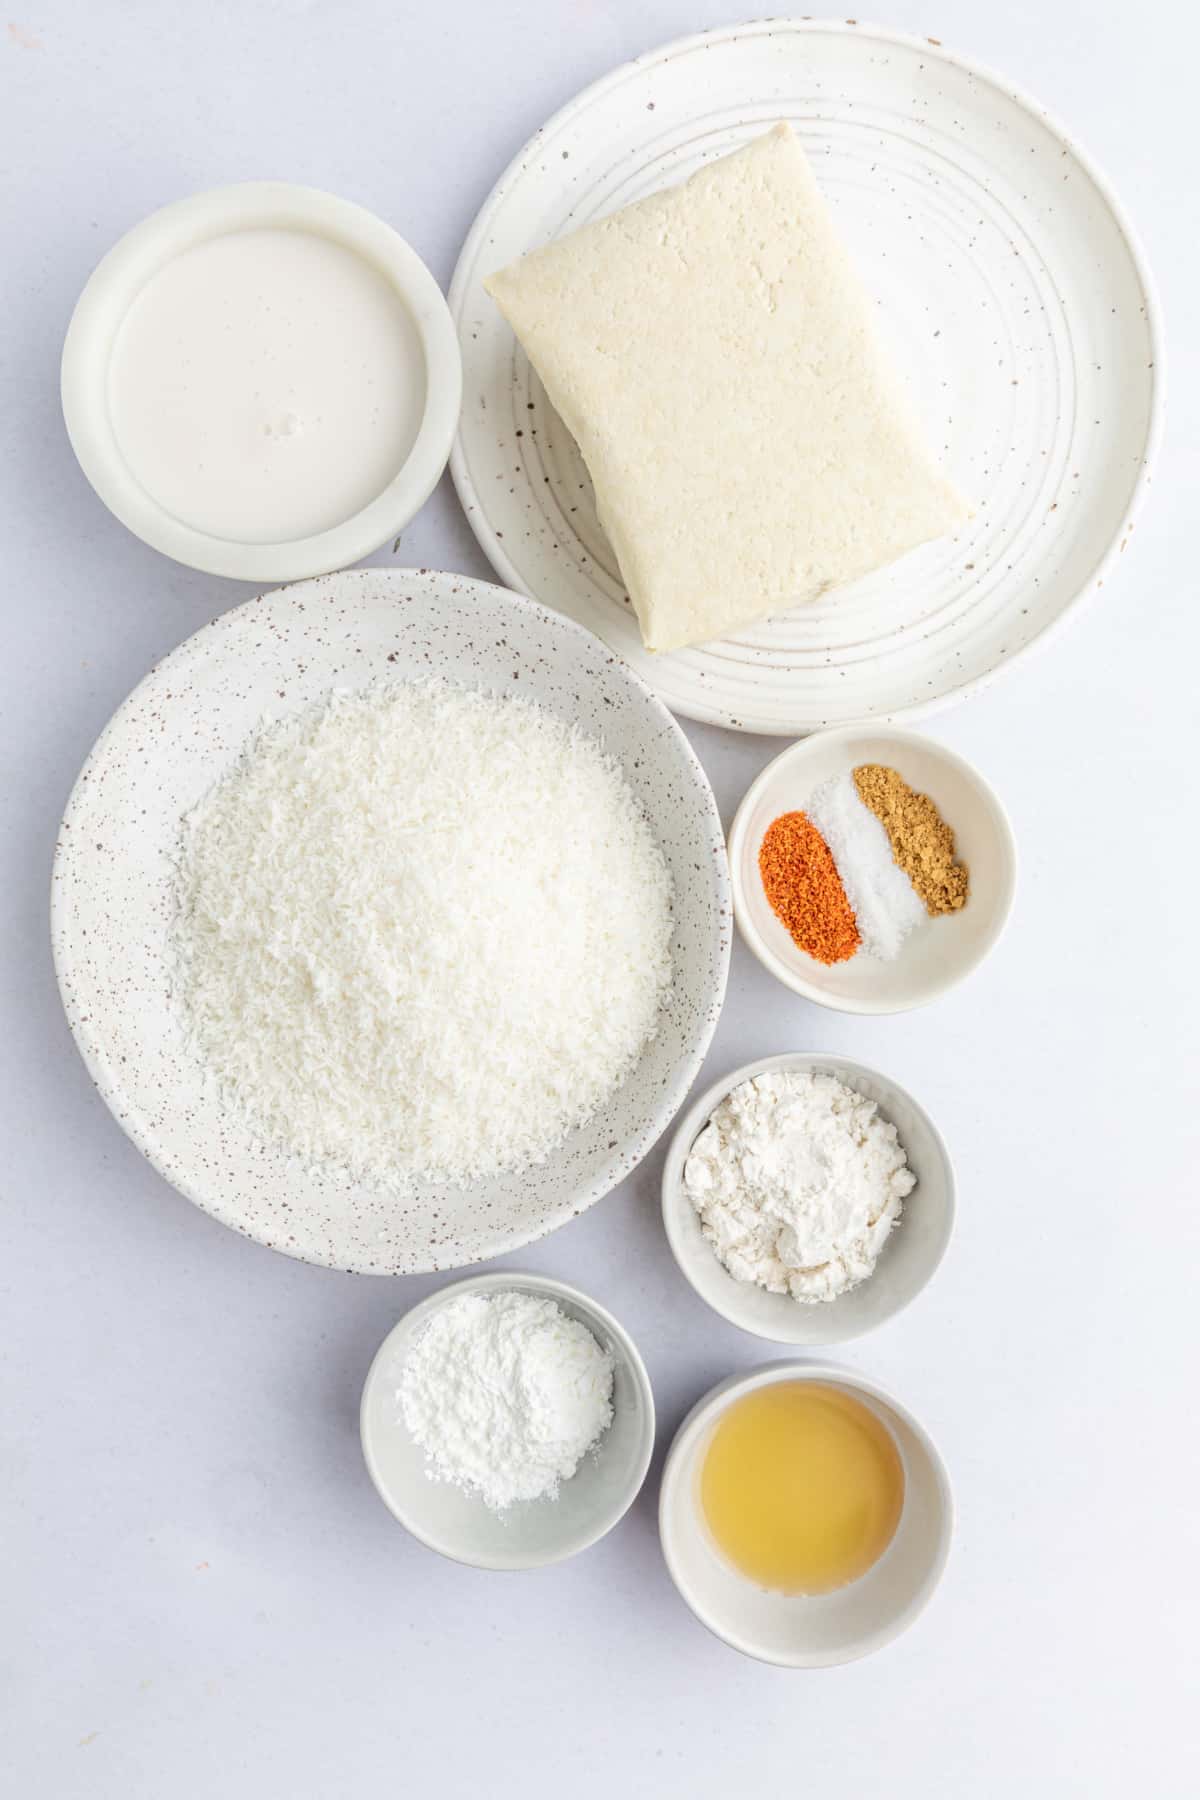 Overhead view of ingredients for crispy coconut tofu in separate bowls: milk, block of tofu, shredded coconut, spices, flour, starch, and maple syrup.